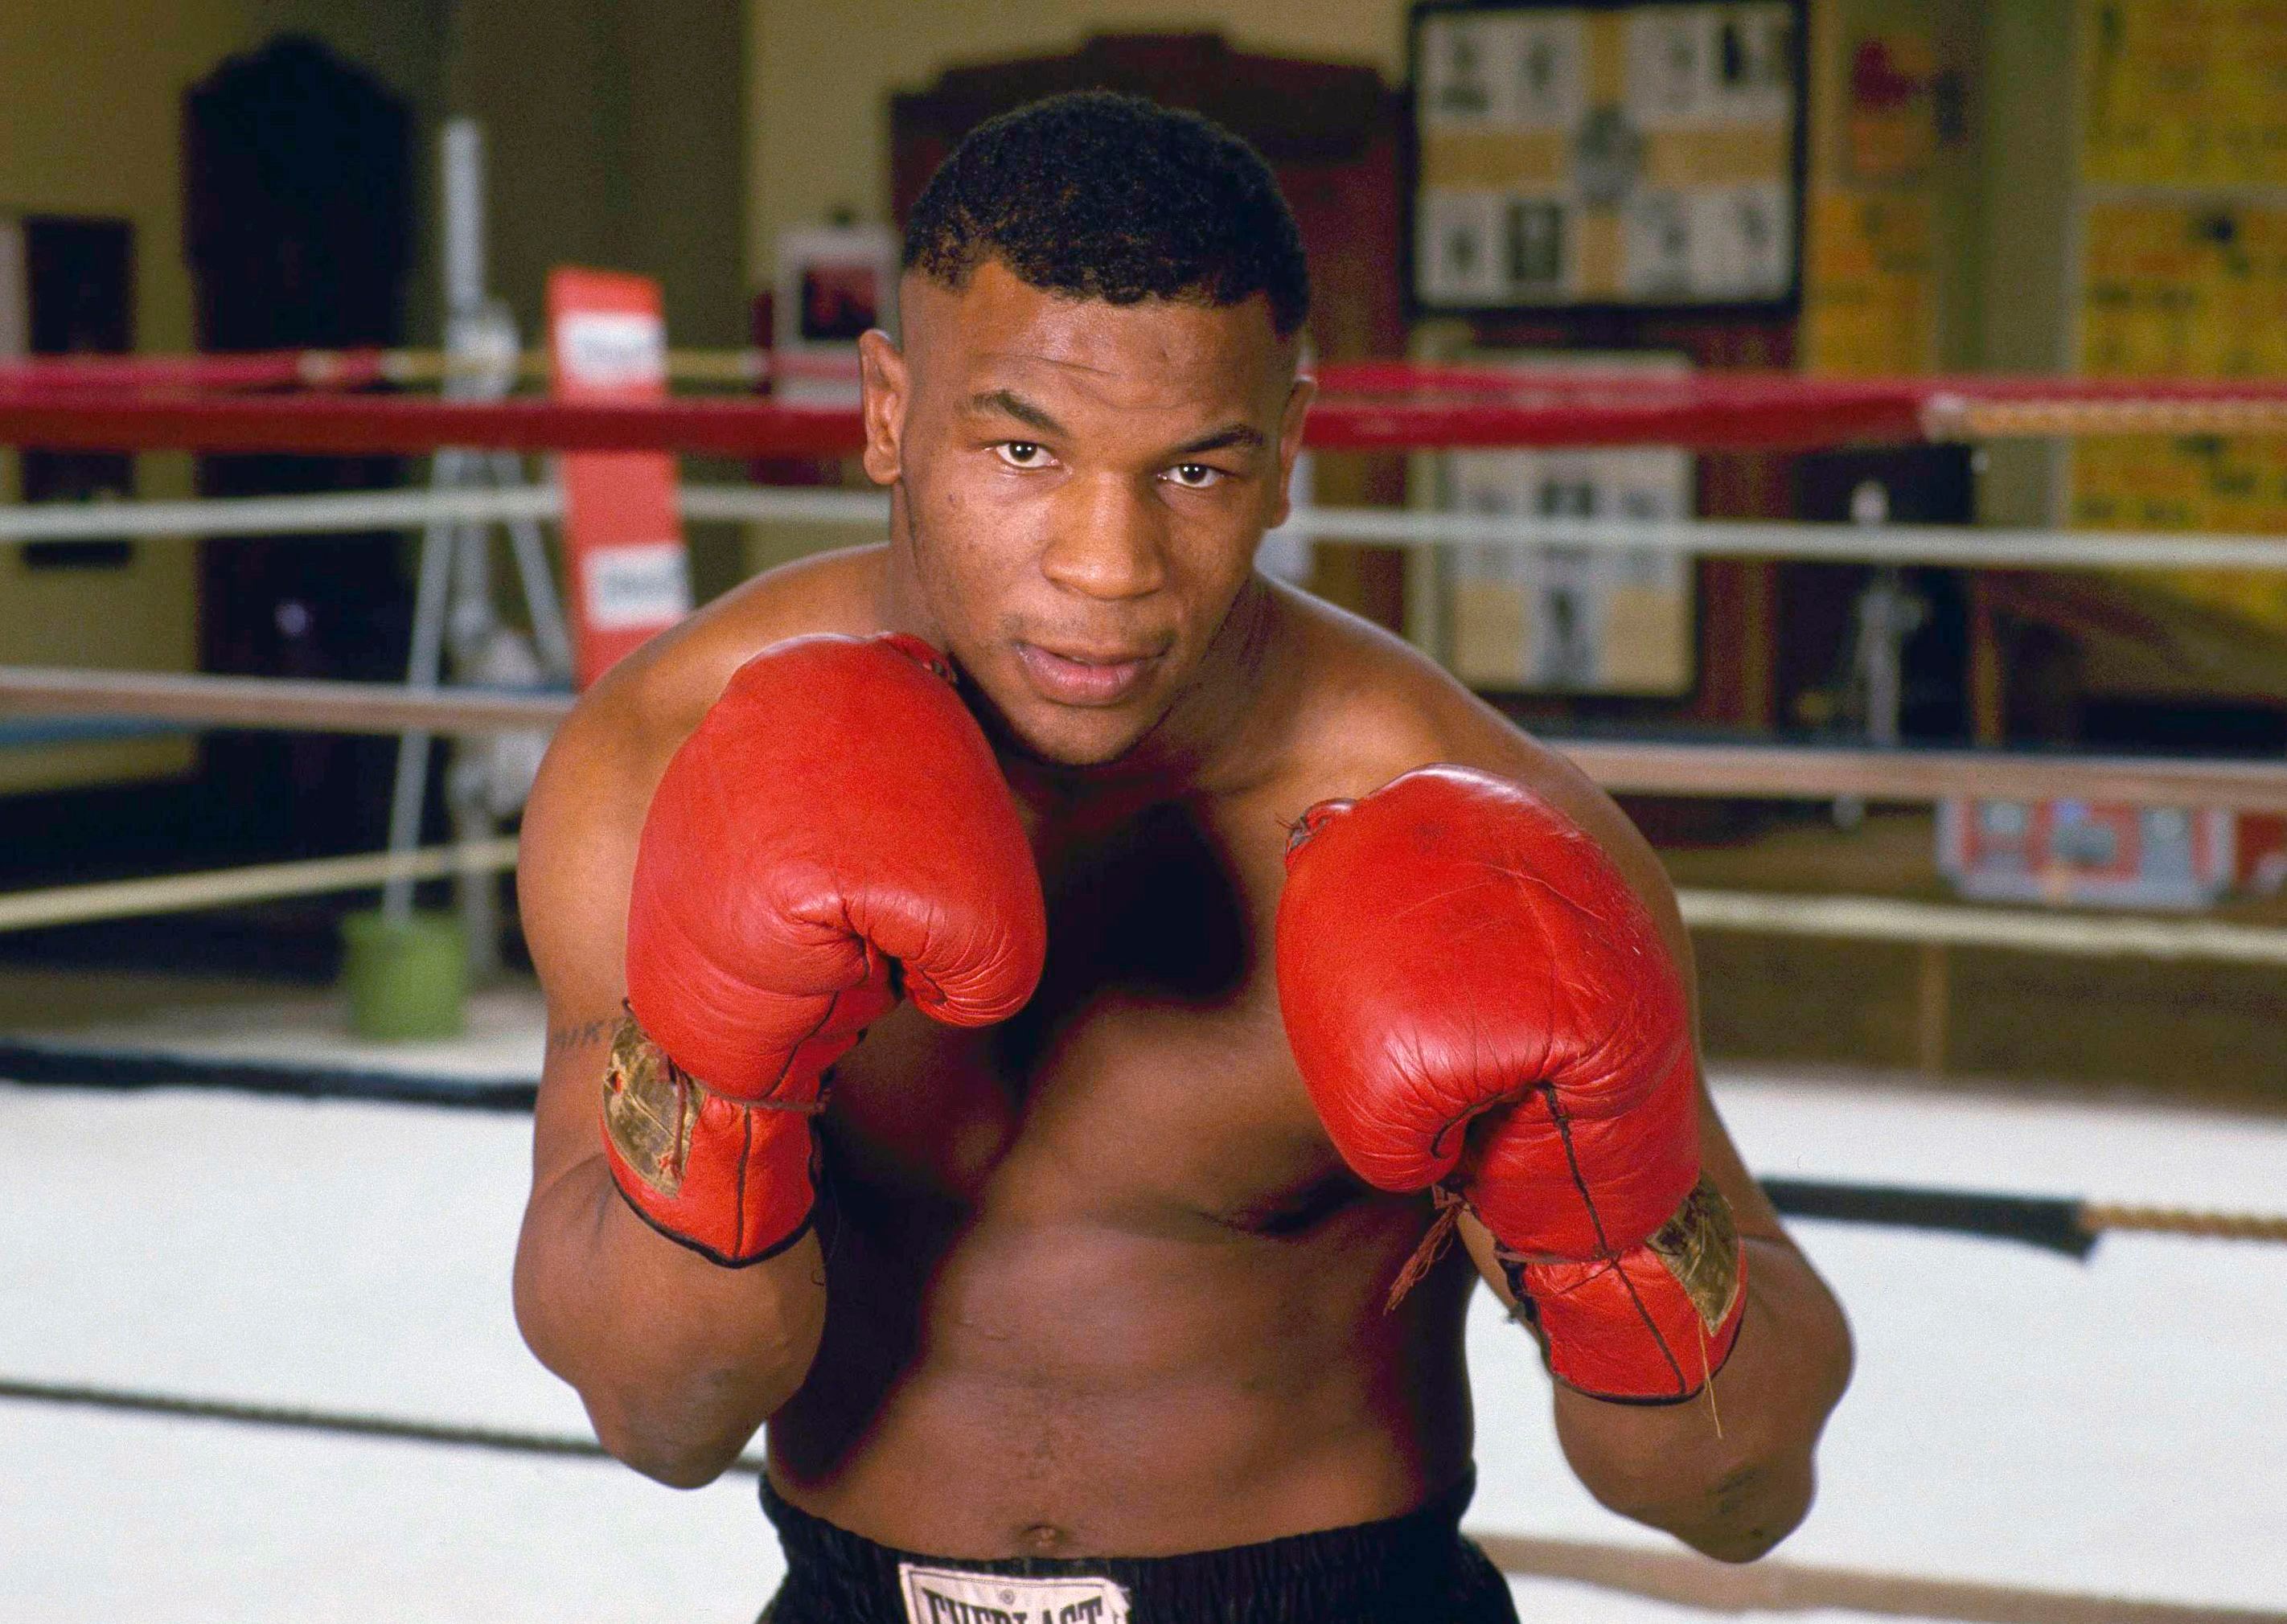 Mike Tyson's incredibly controversial life and career in photos, Gallery